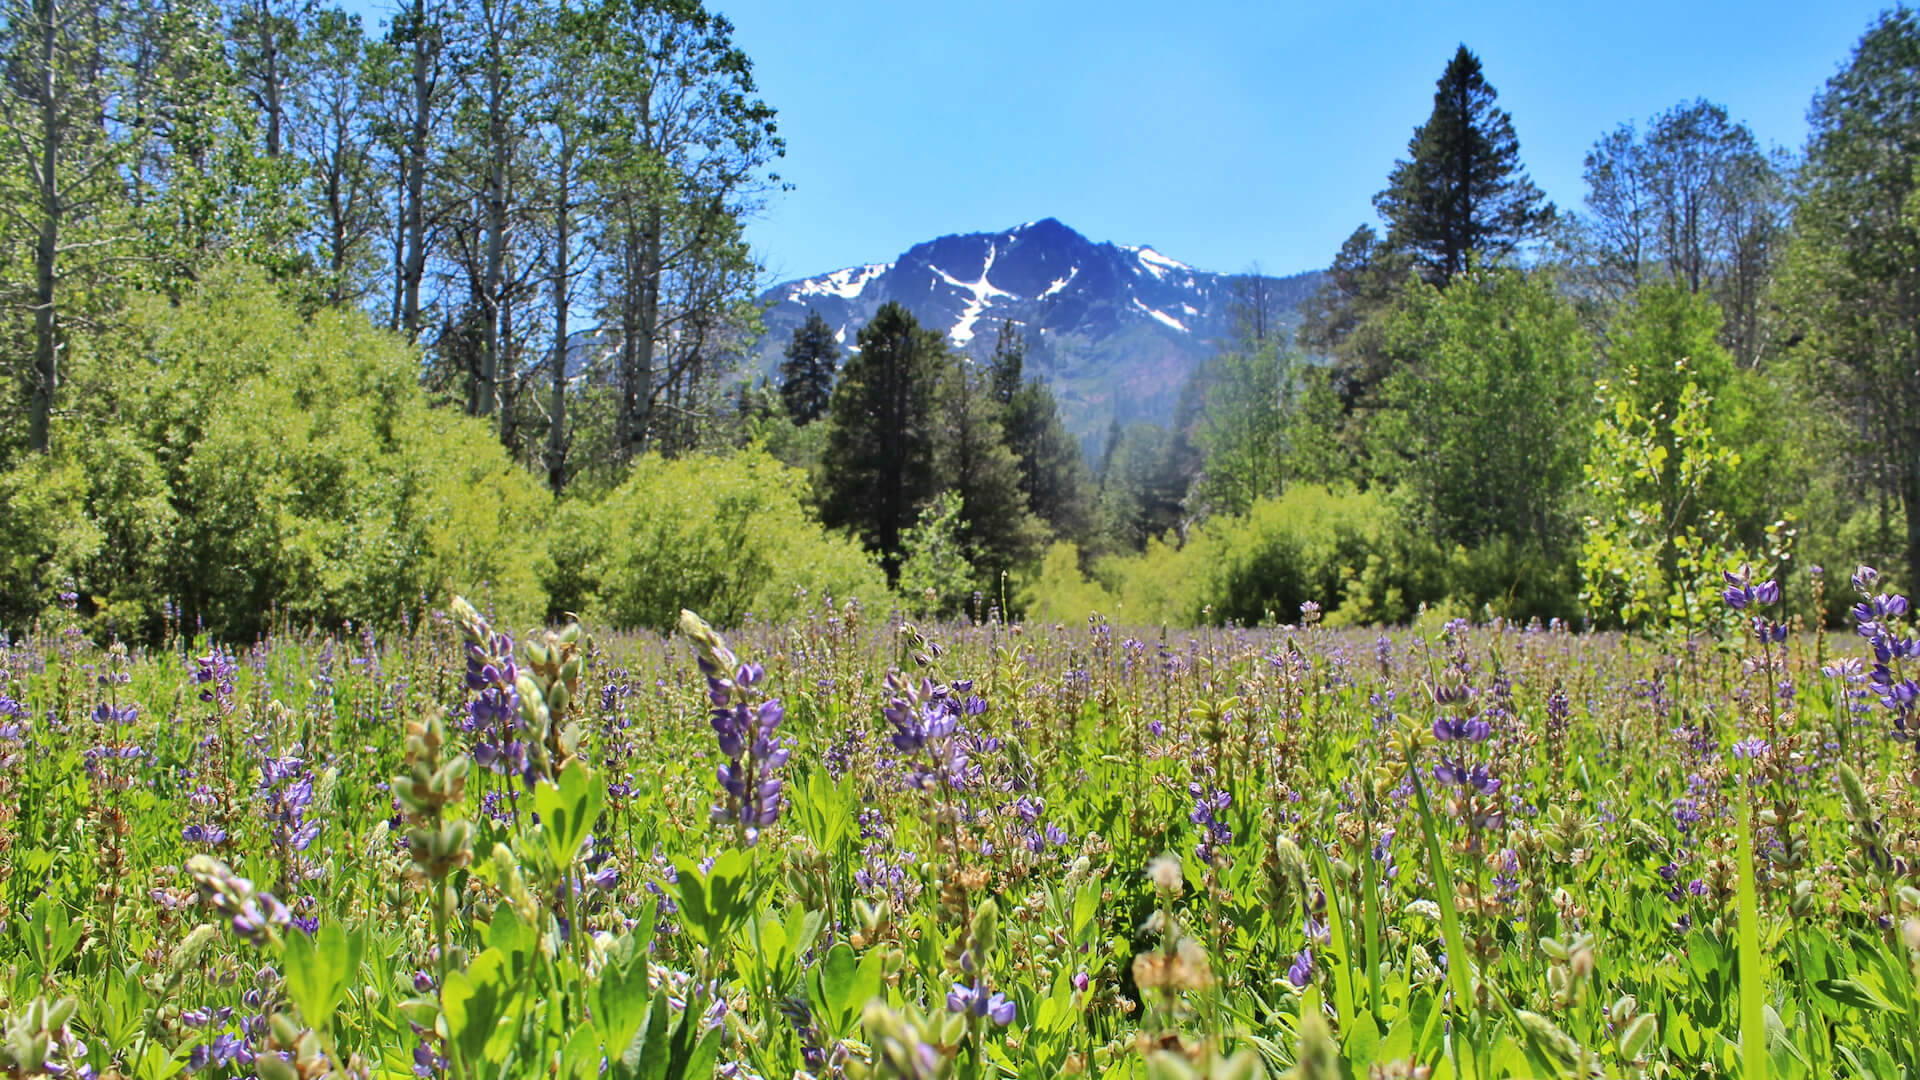 View of Mt Tallac with Wild Flowers in the Meadow - Kristin Rust / LTVA